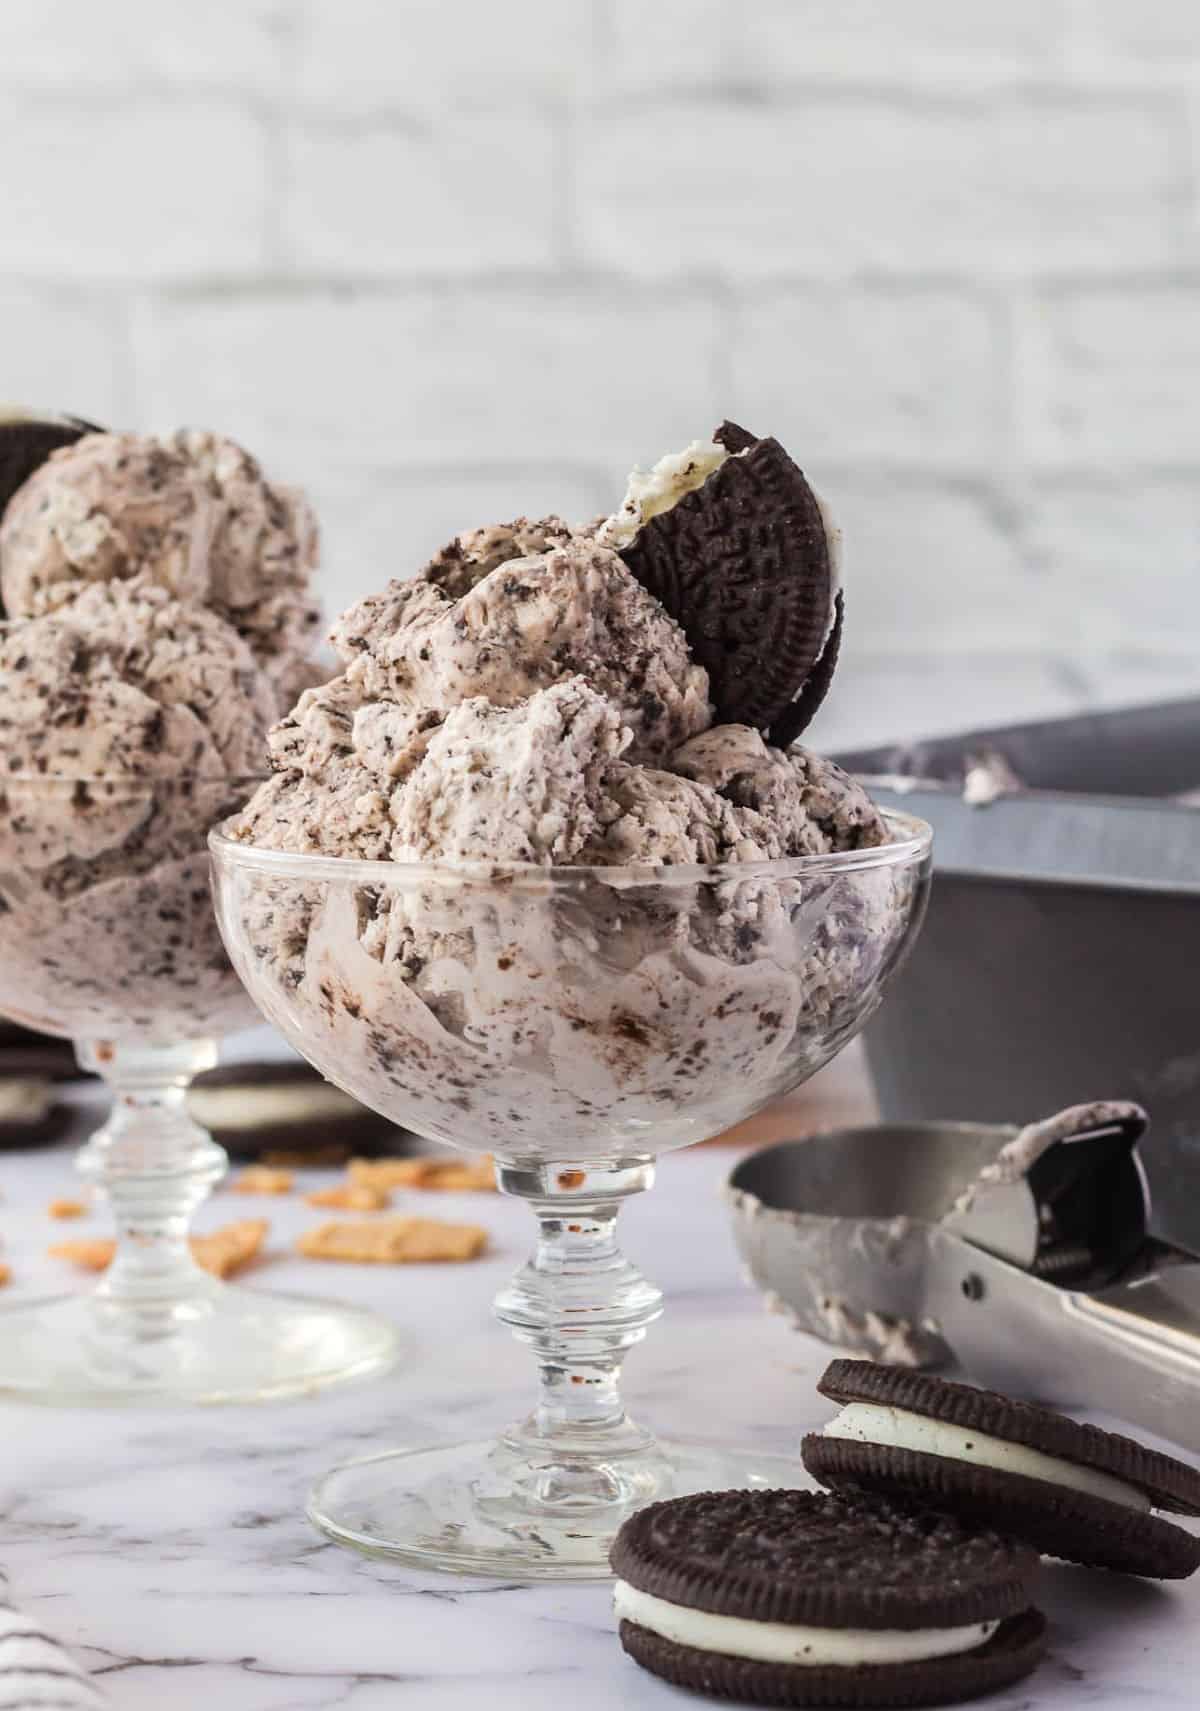 Ice cream in a bowl with a oreo on top.